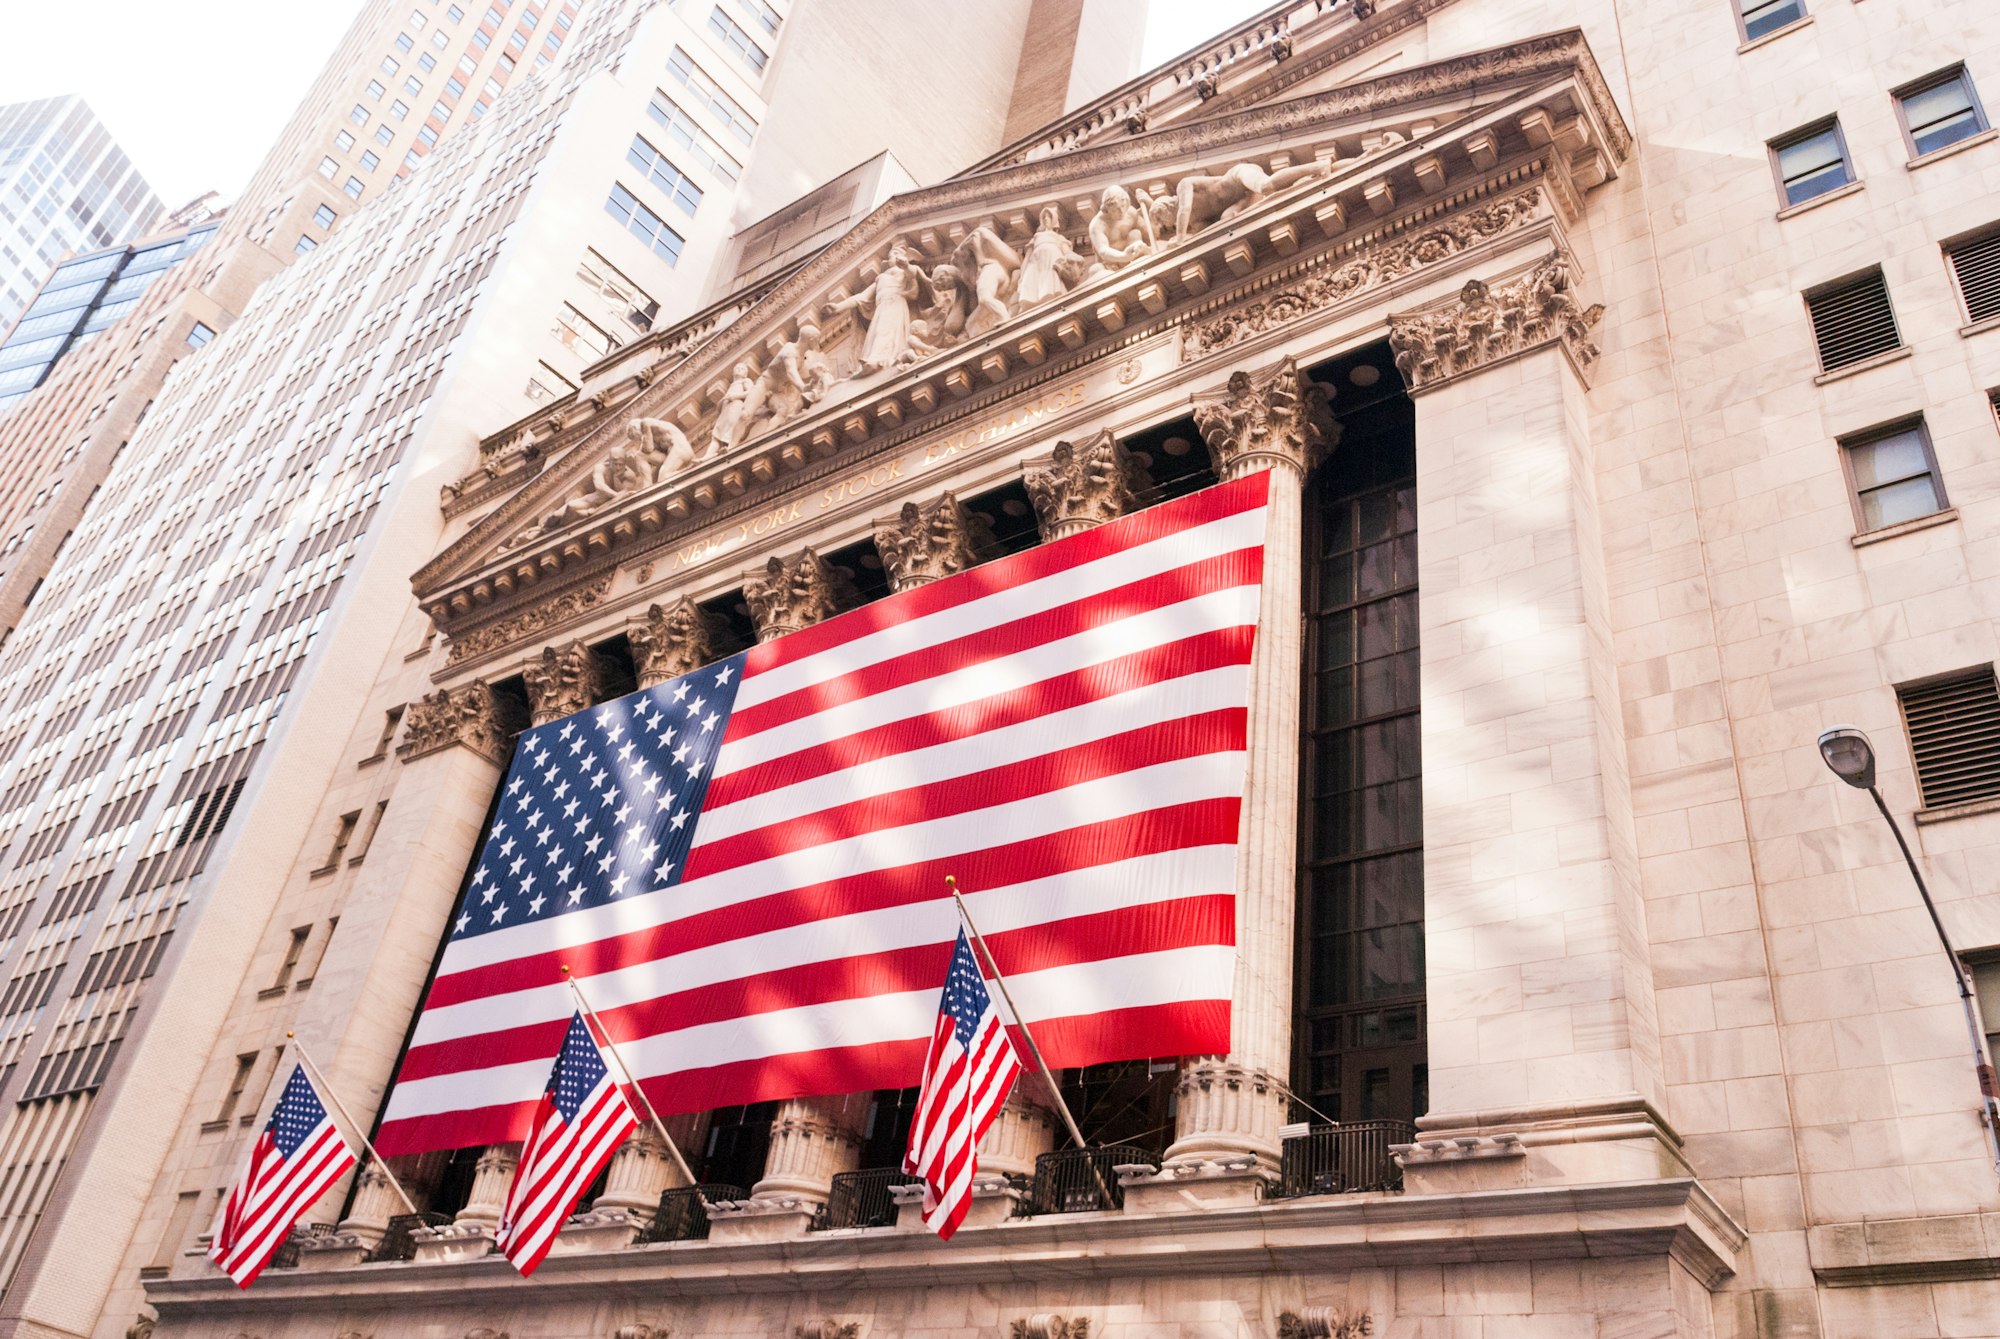 Experience the NYSE - New York Stock Exchange